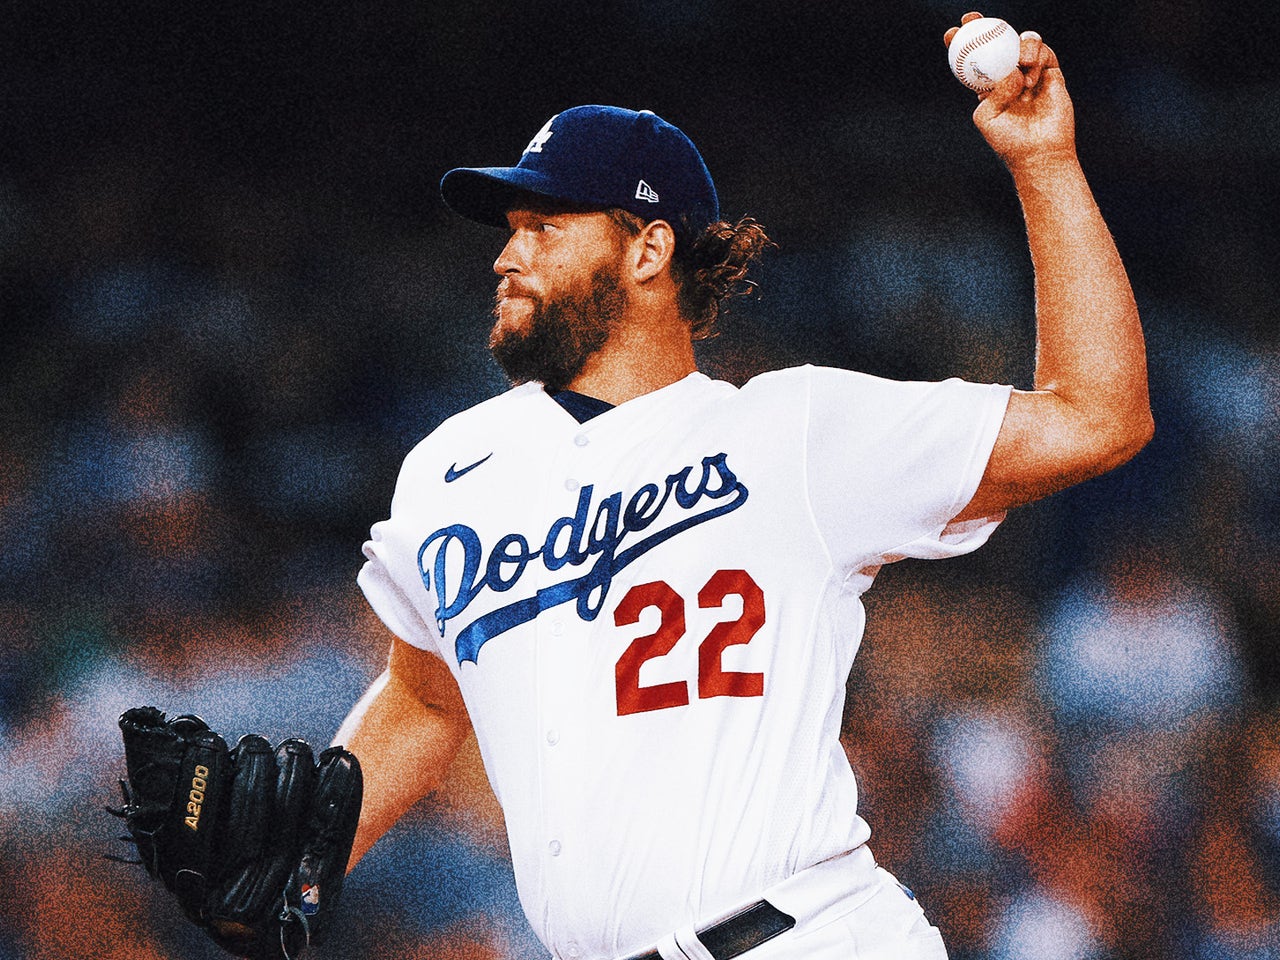 Clayton Kershaw joins Team USA roster for 2023 World Baseball Classic